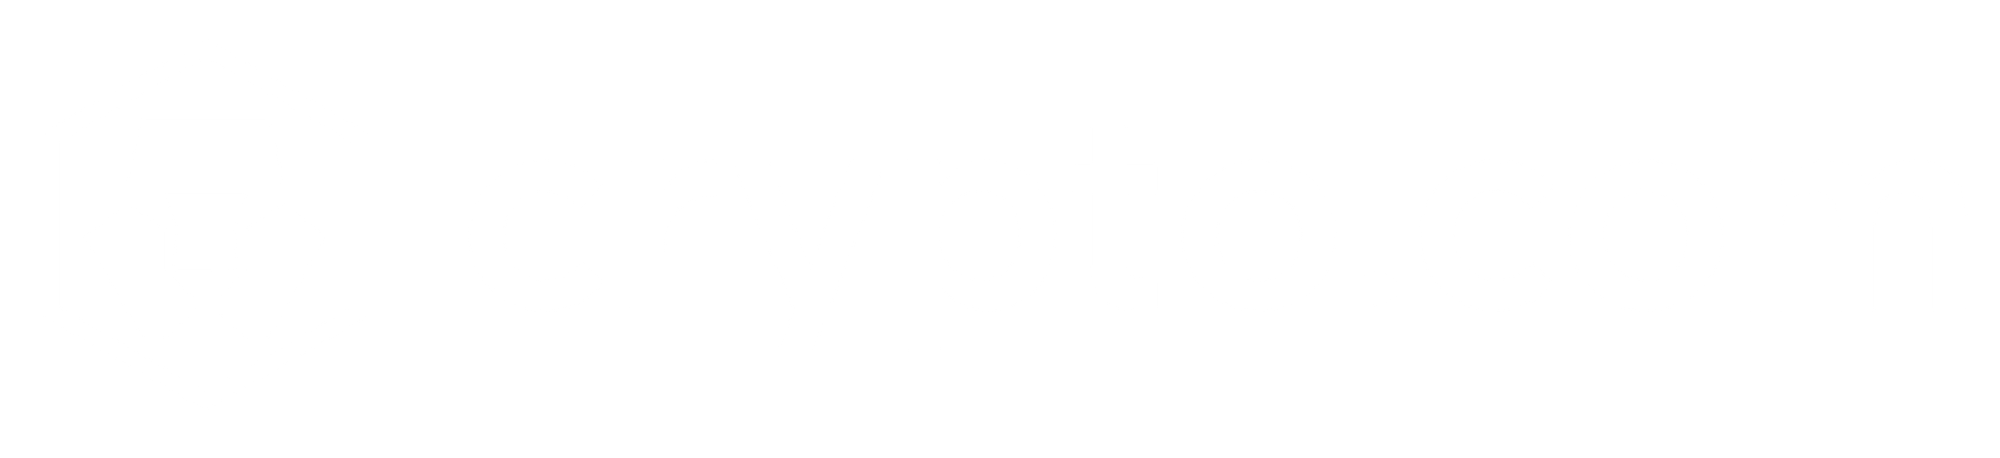 Currency Crypto Digital Free HD Image PNG Image